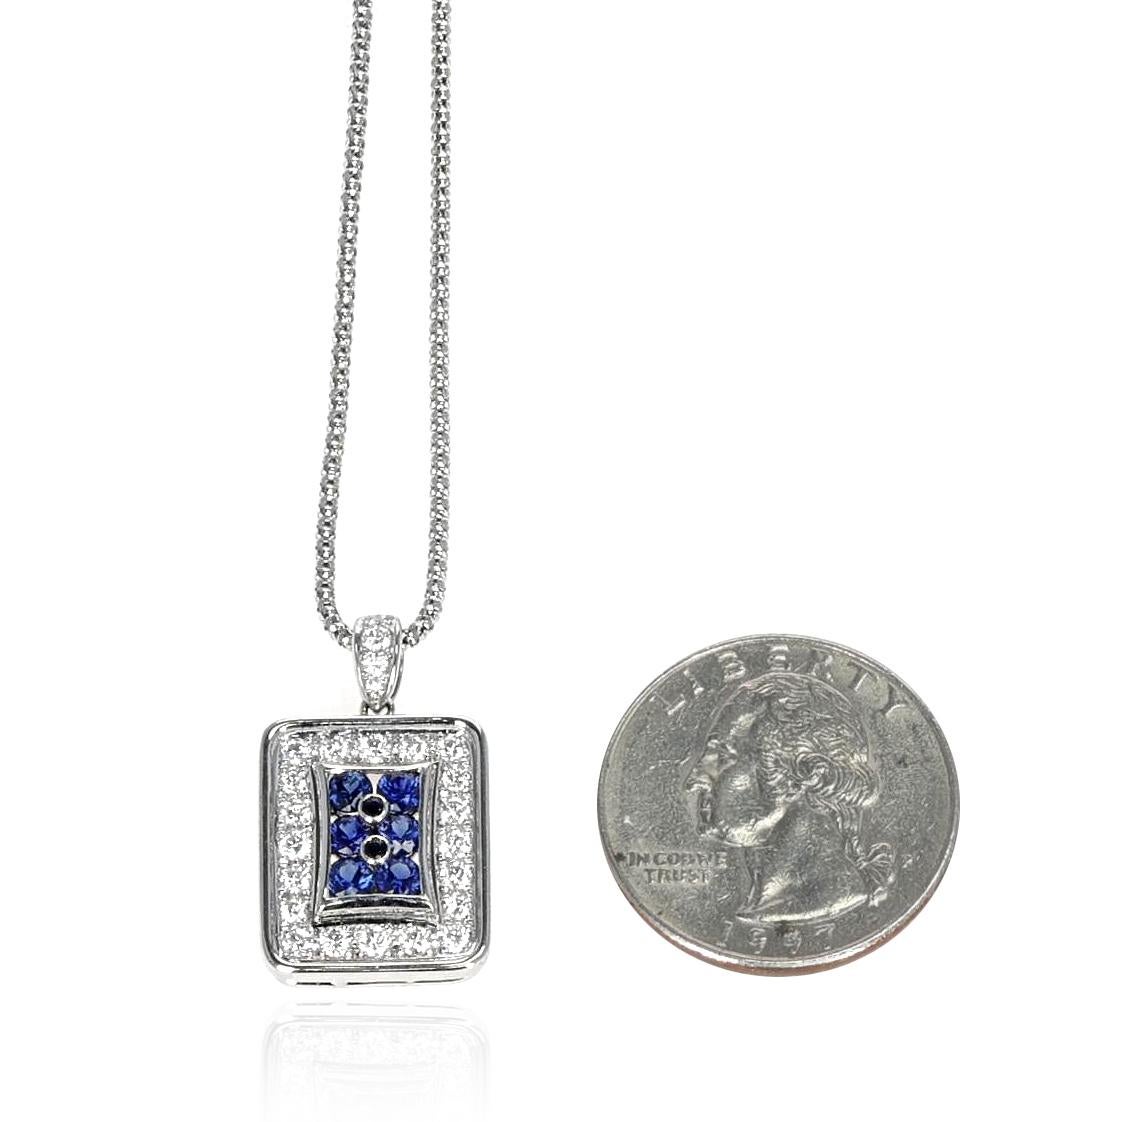 A Round Sapphire and Diamond Rectangular Pendant with Chain made in Platinum. The total weight of the sapphire is 0.60 carats and the total weight of the diamonds is 0.88 carats. The total weight of the pendant necklace is 10.72 grams. 